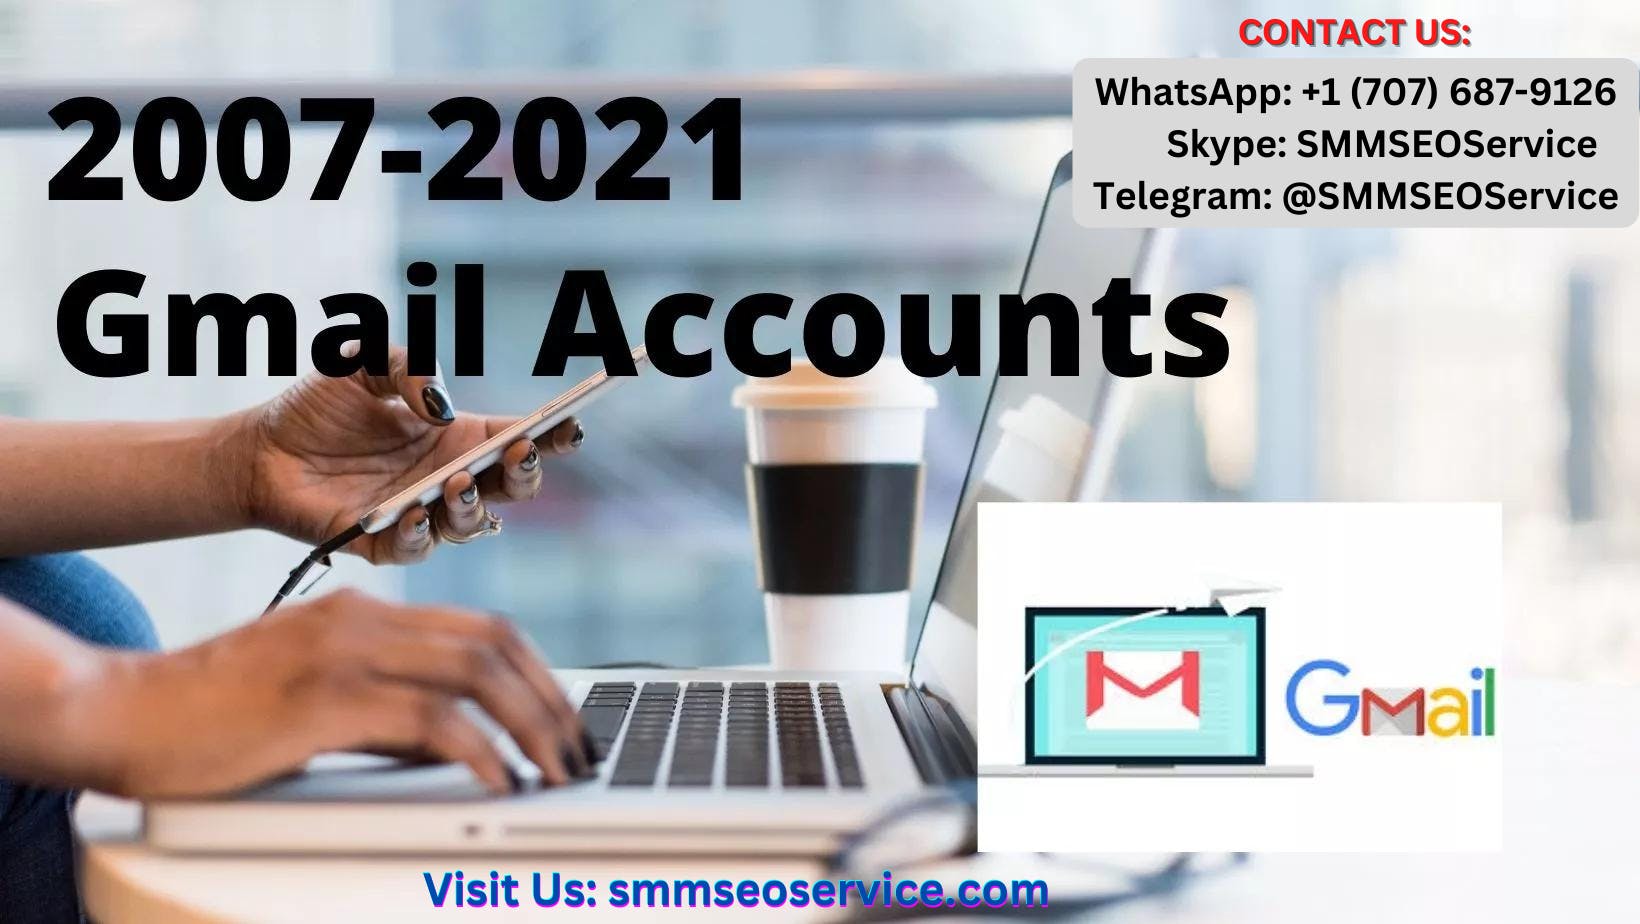 Smmseoservice Buy Old Gmail Accounts media 1